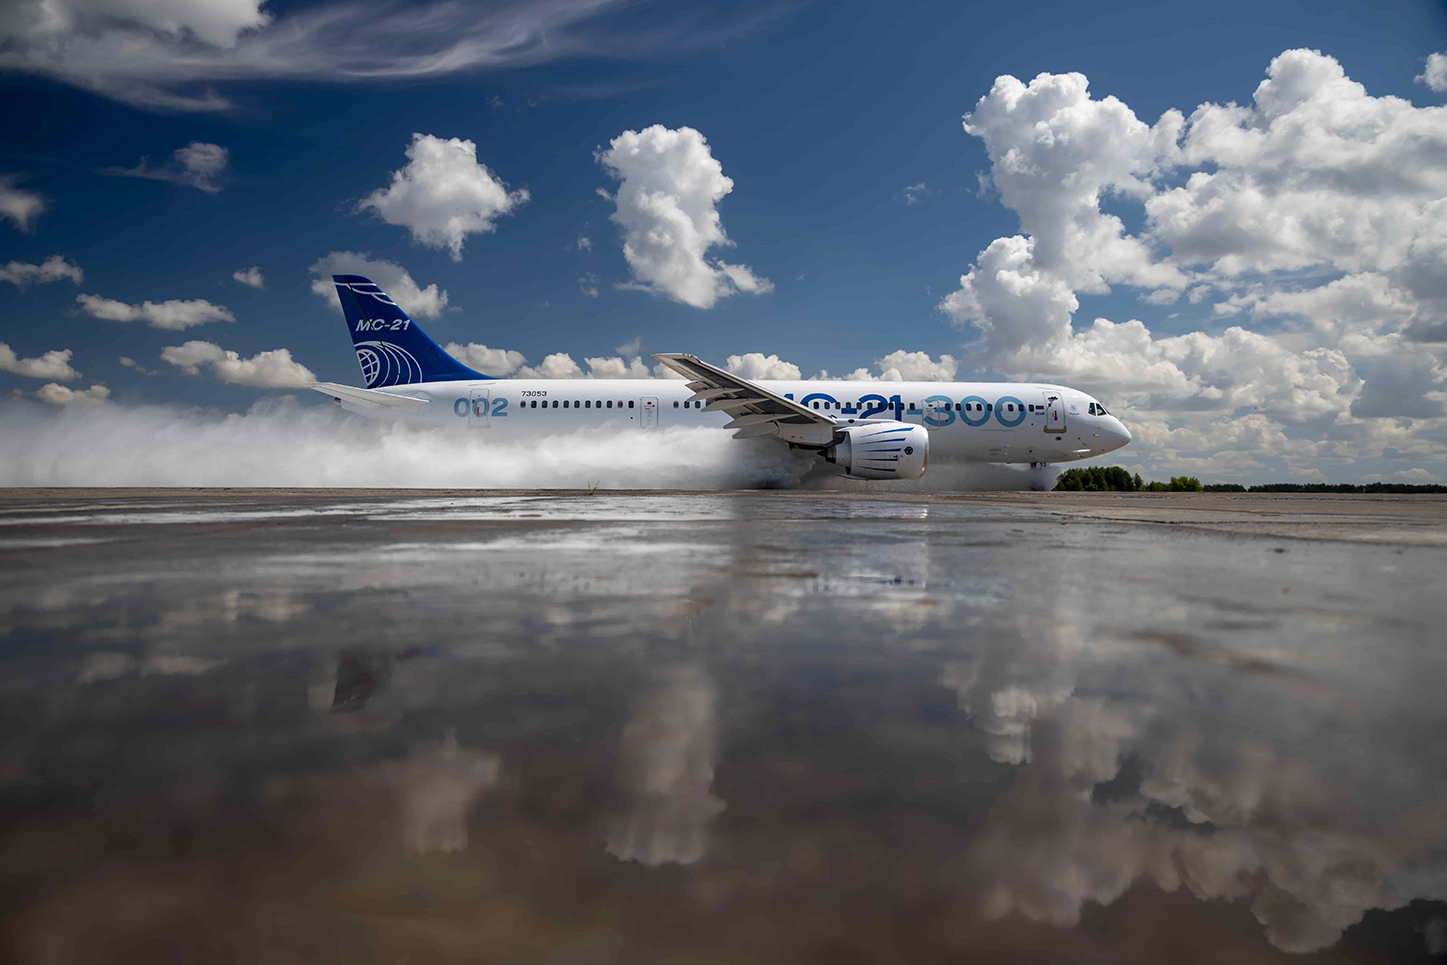 Preliminary results of MC-21-300 aircraft tests on engines protection against water penetration are summed up